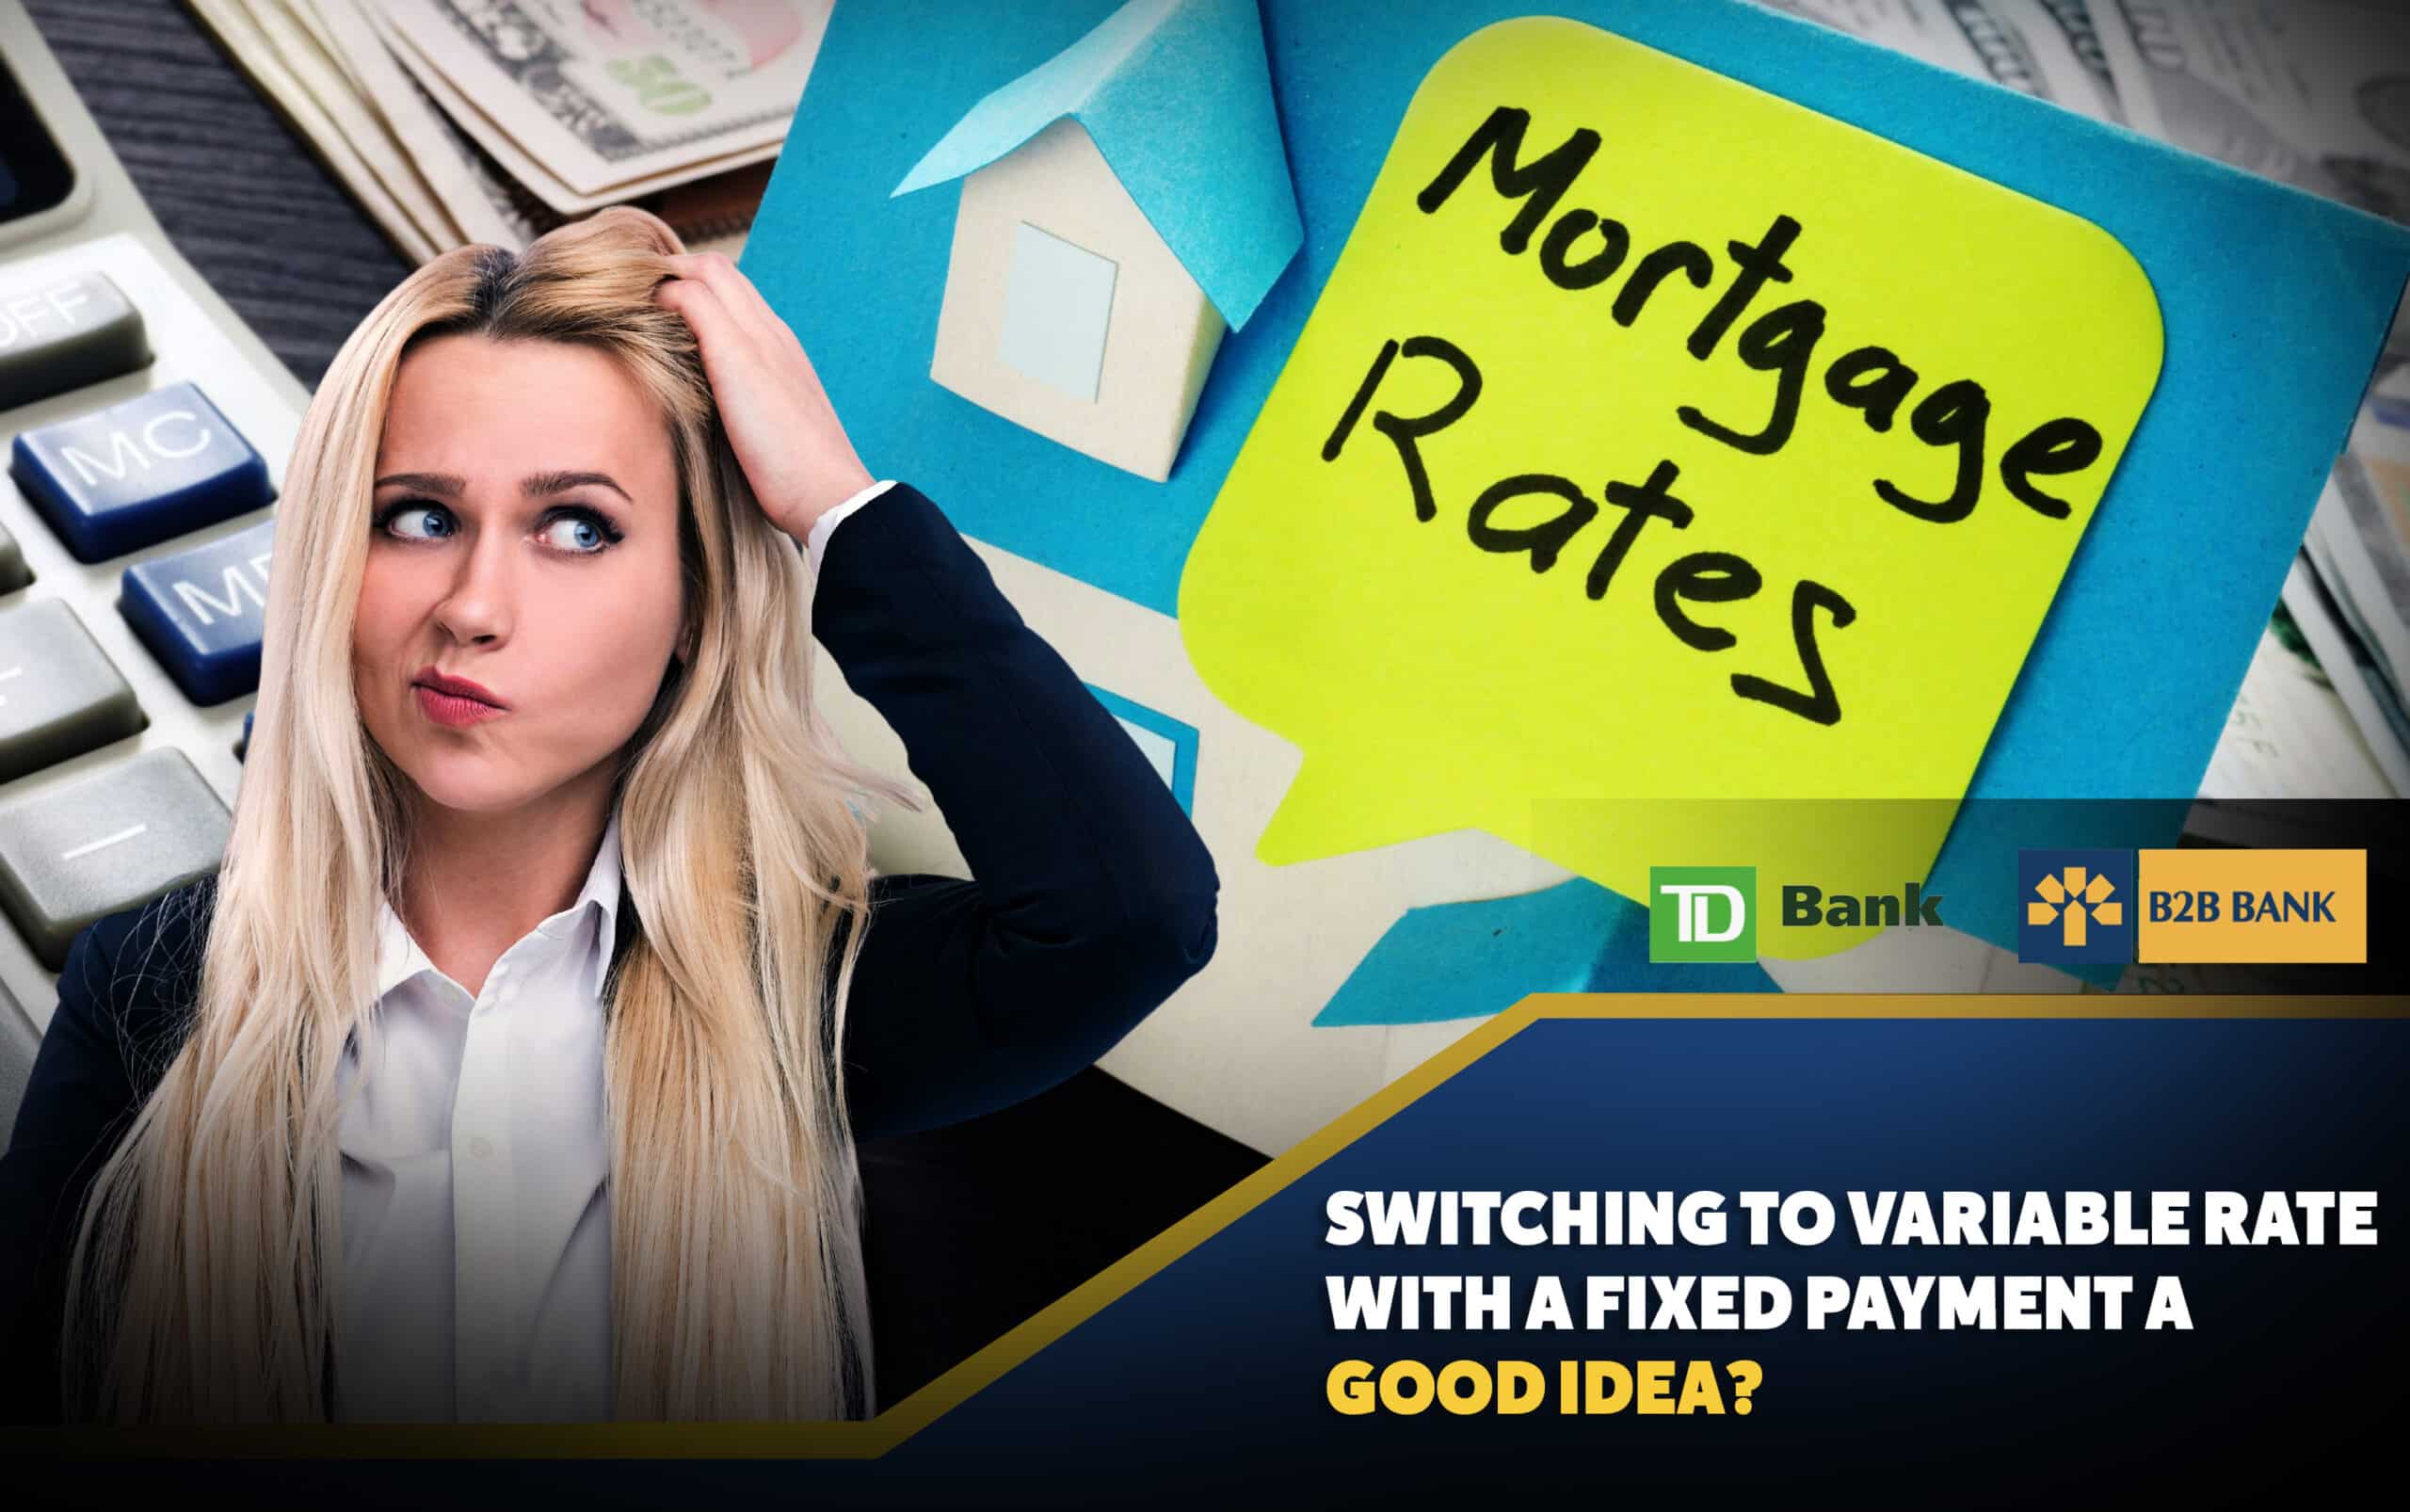 Why Switching to a Variable Rate with a Fixed Payment May Be a Good Idea